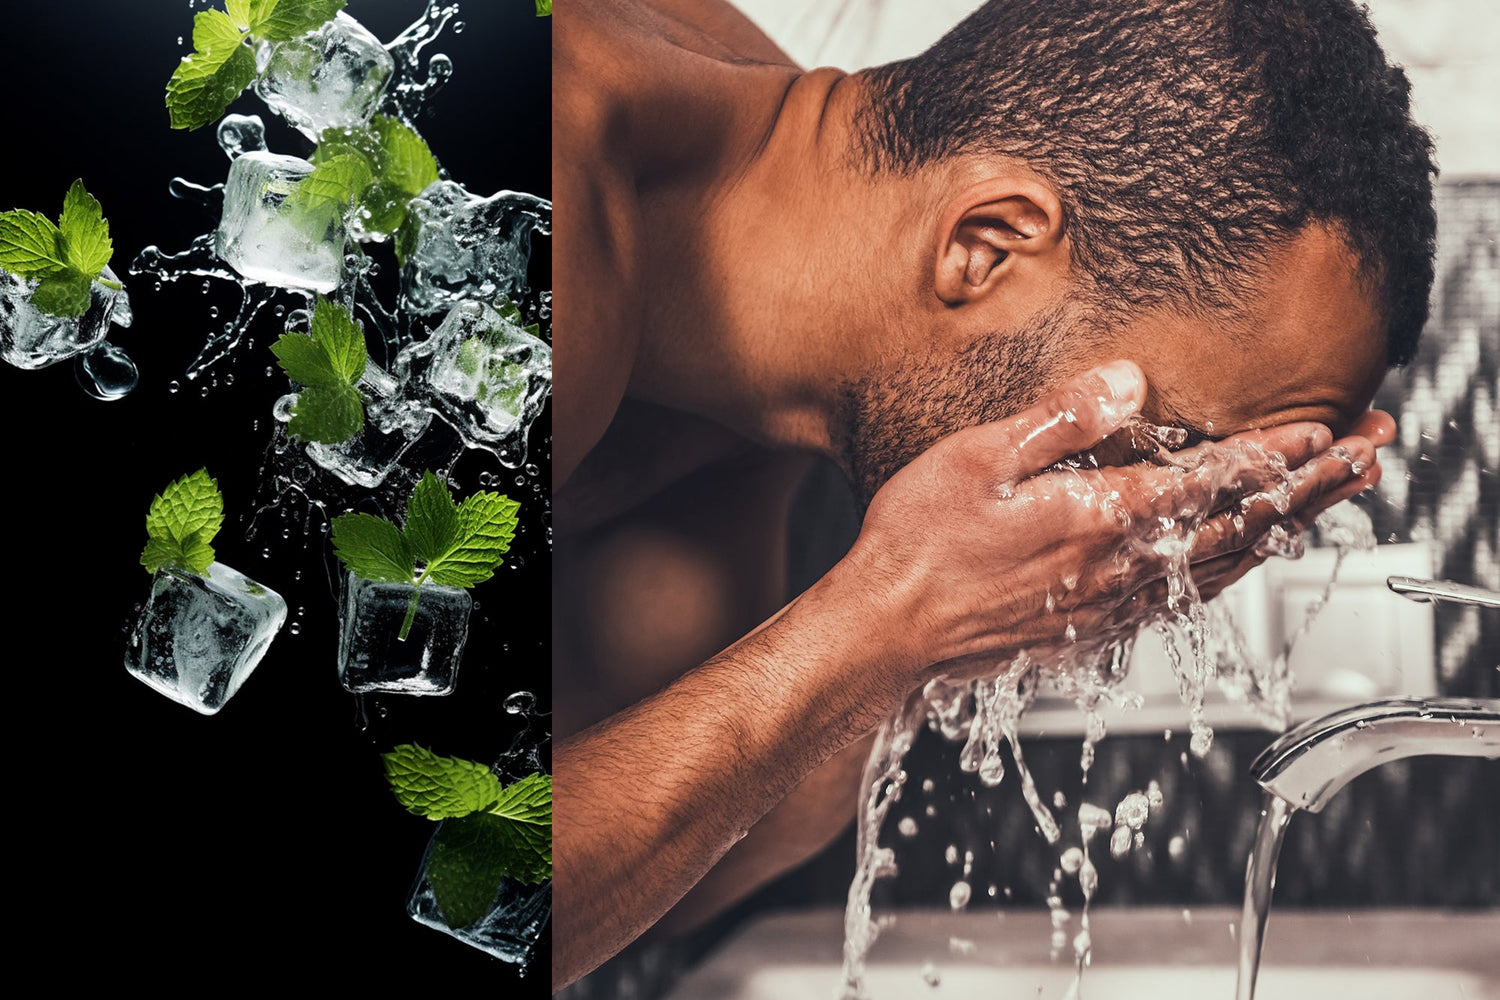 Peppermint Oil Skin Benefits and MOX: “It’s Like an Ice Bath for Your Face!” - MOX Skincare